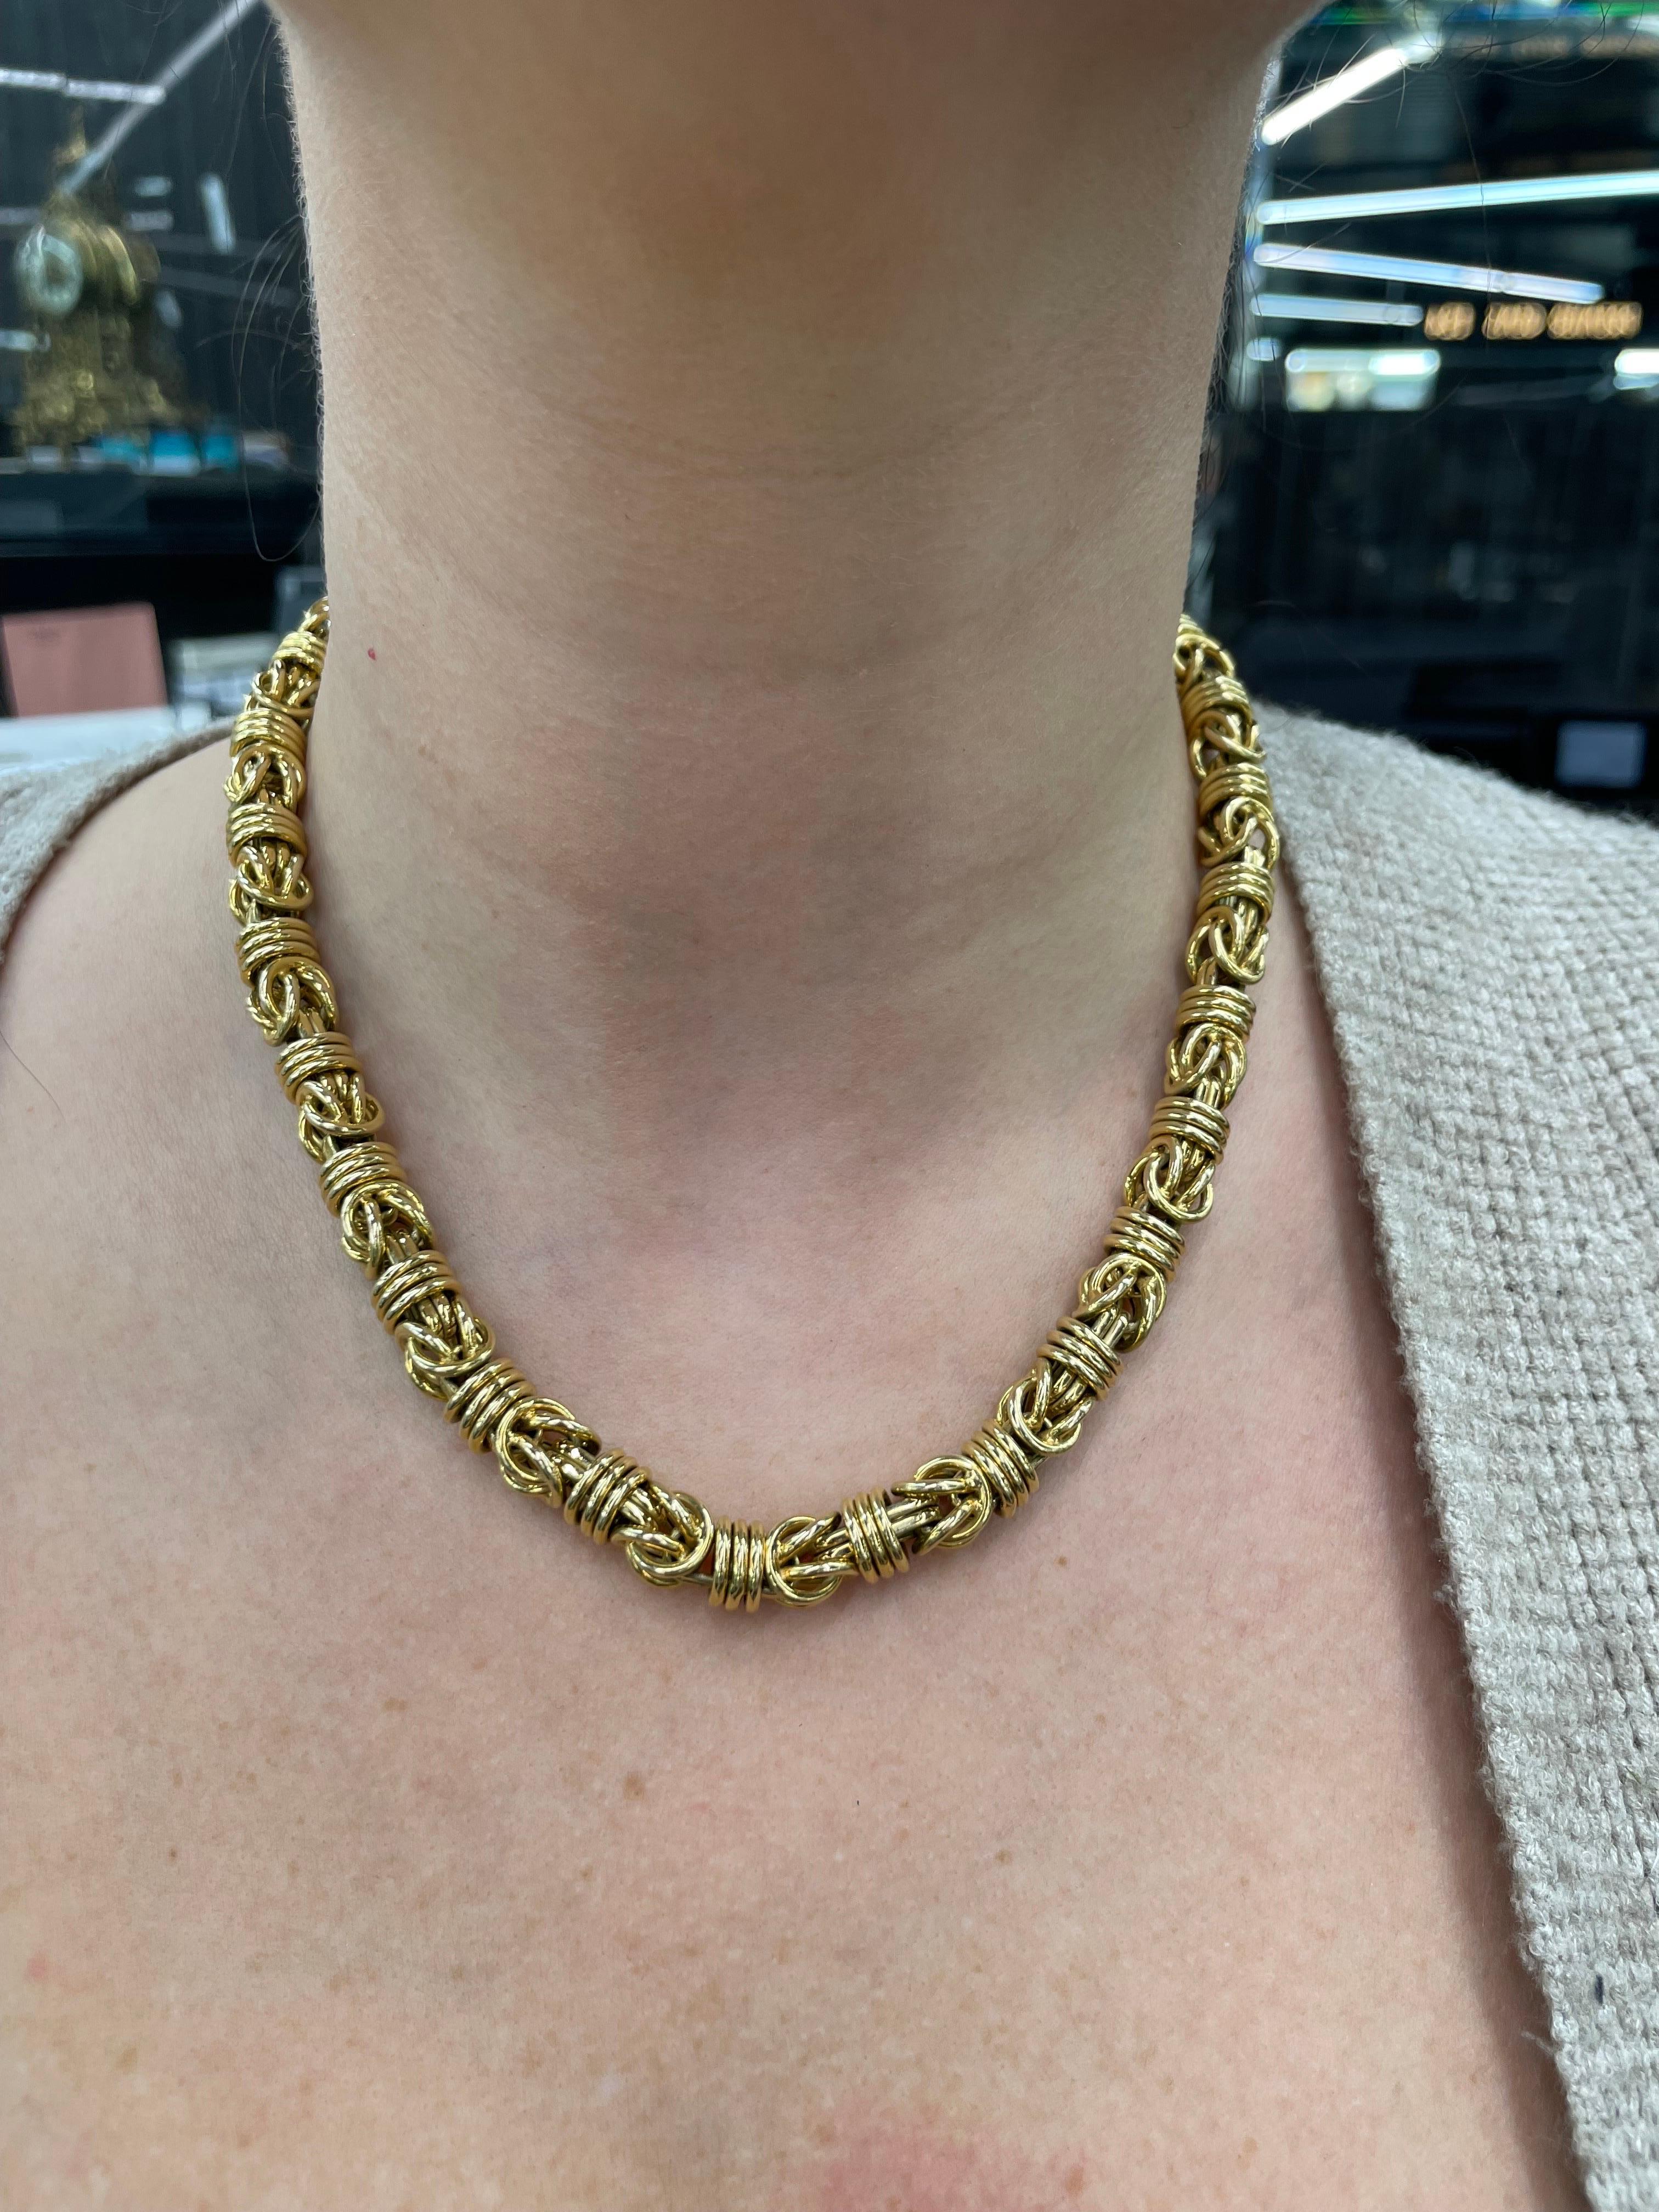 Women's 14 Karat Yellow Gold Byzantine Wide Necklace 70 Grams 18.5 Inches Made In Italy For Sale